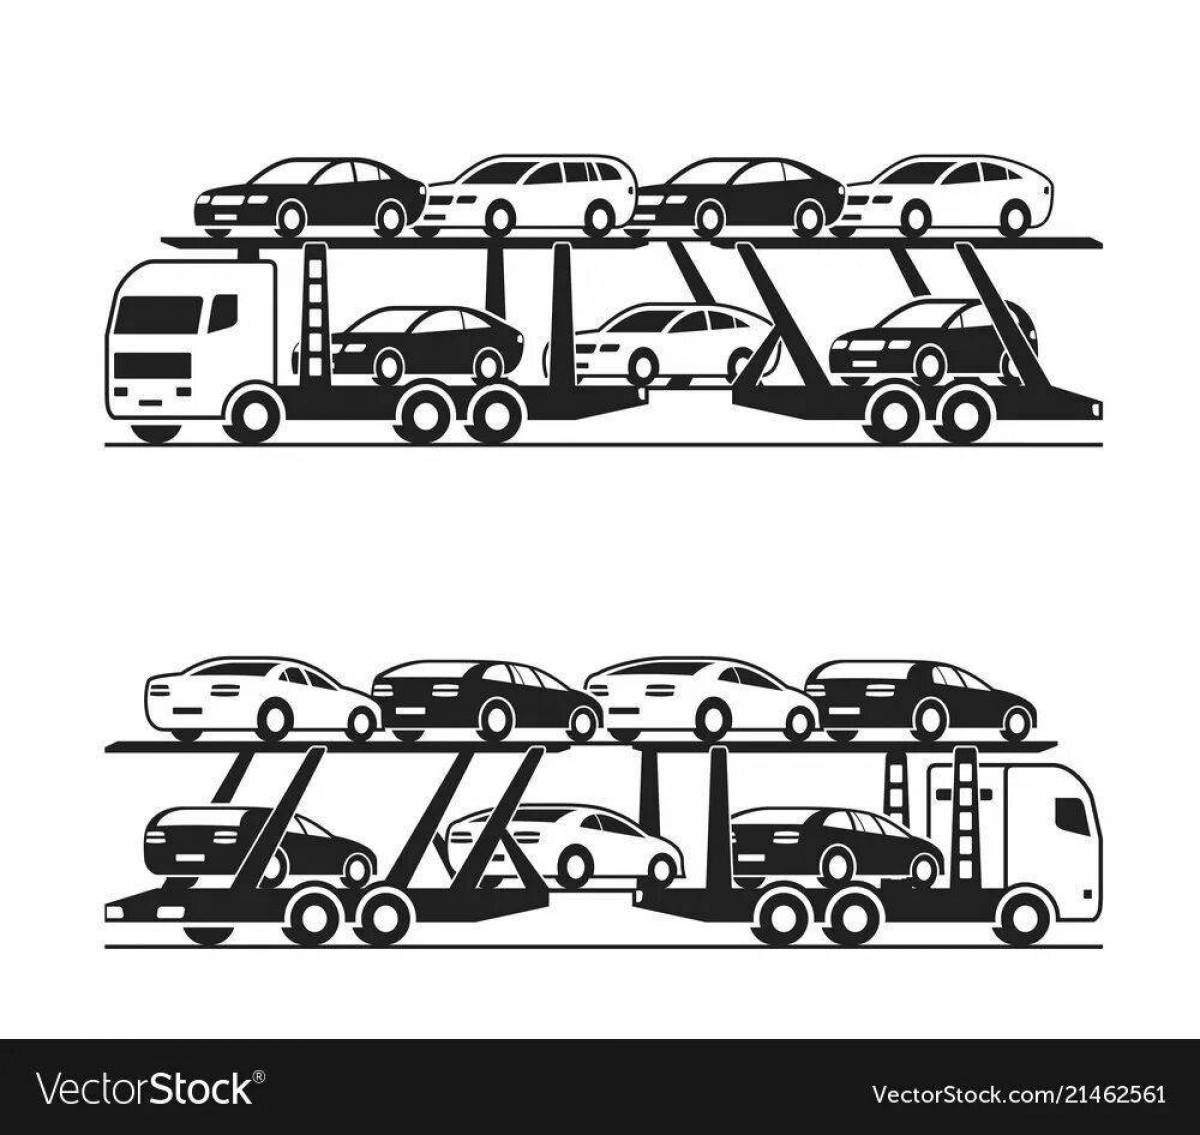 Awesome car transporter coloring page for kids